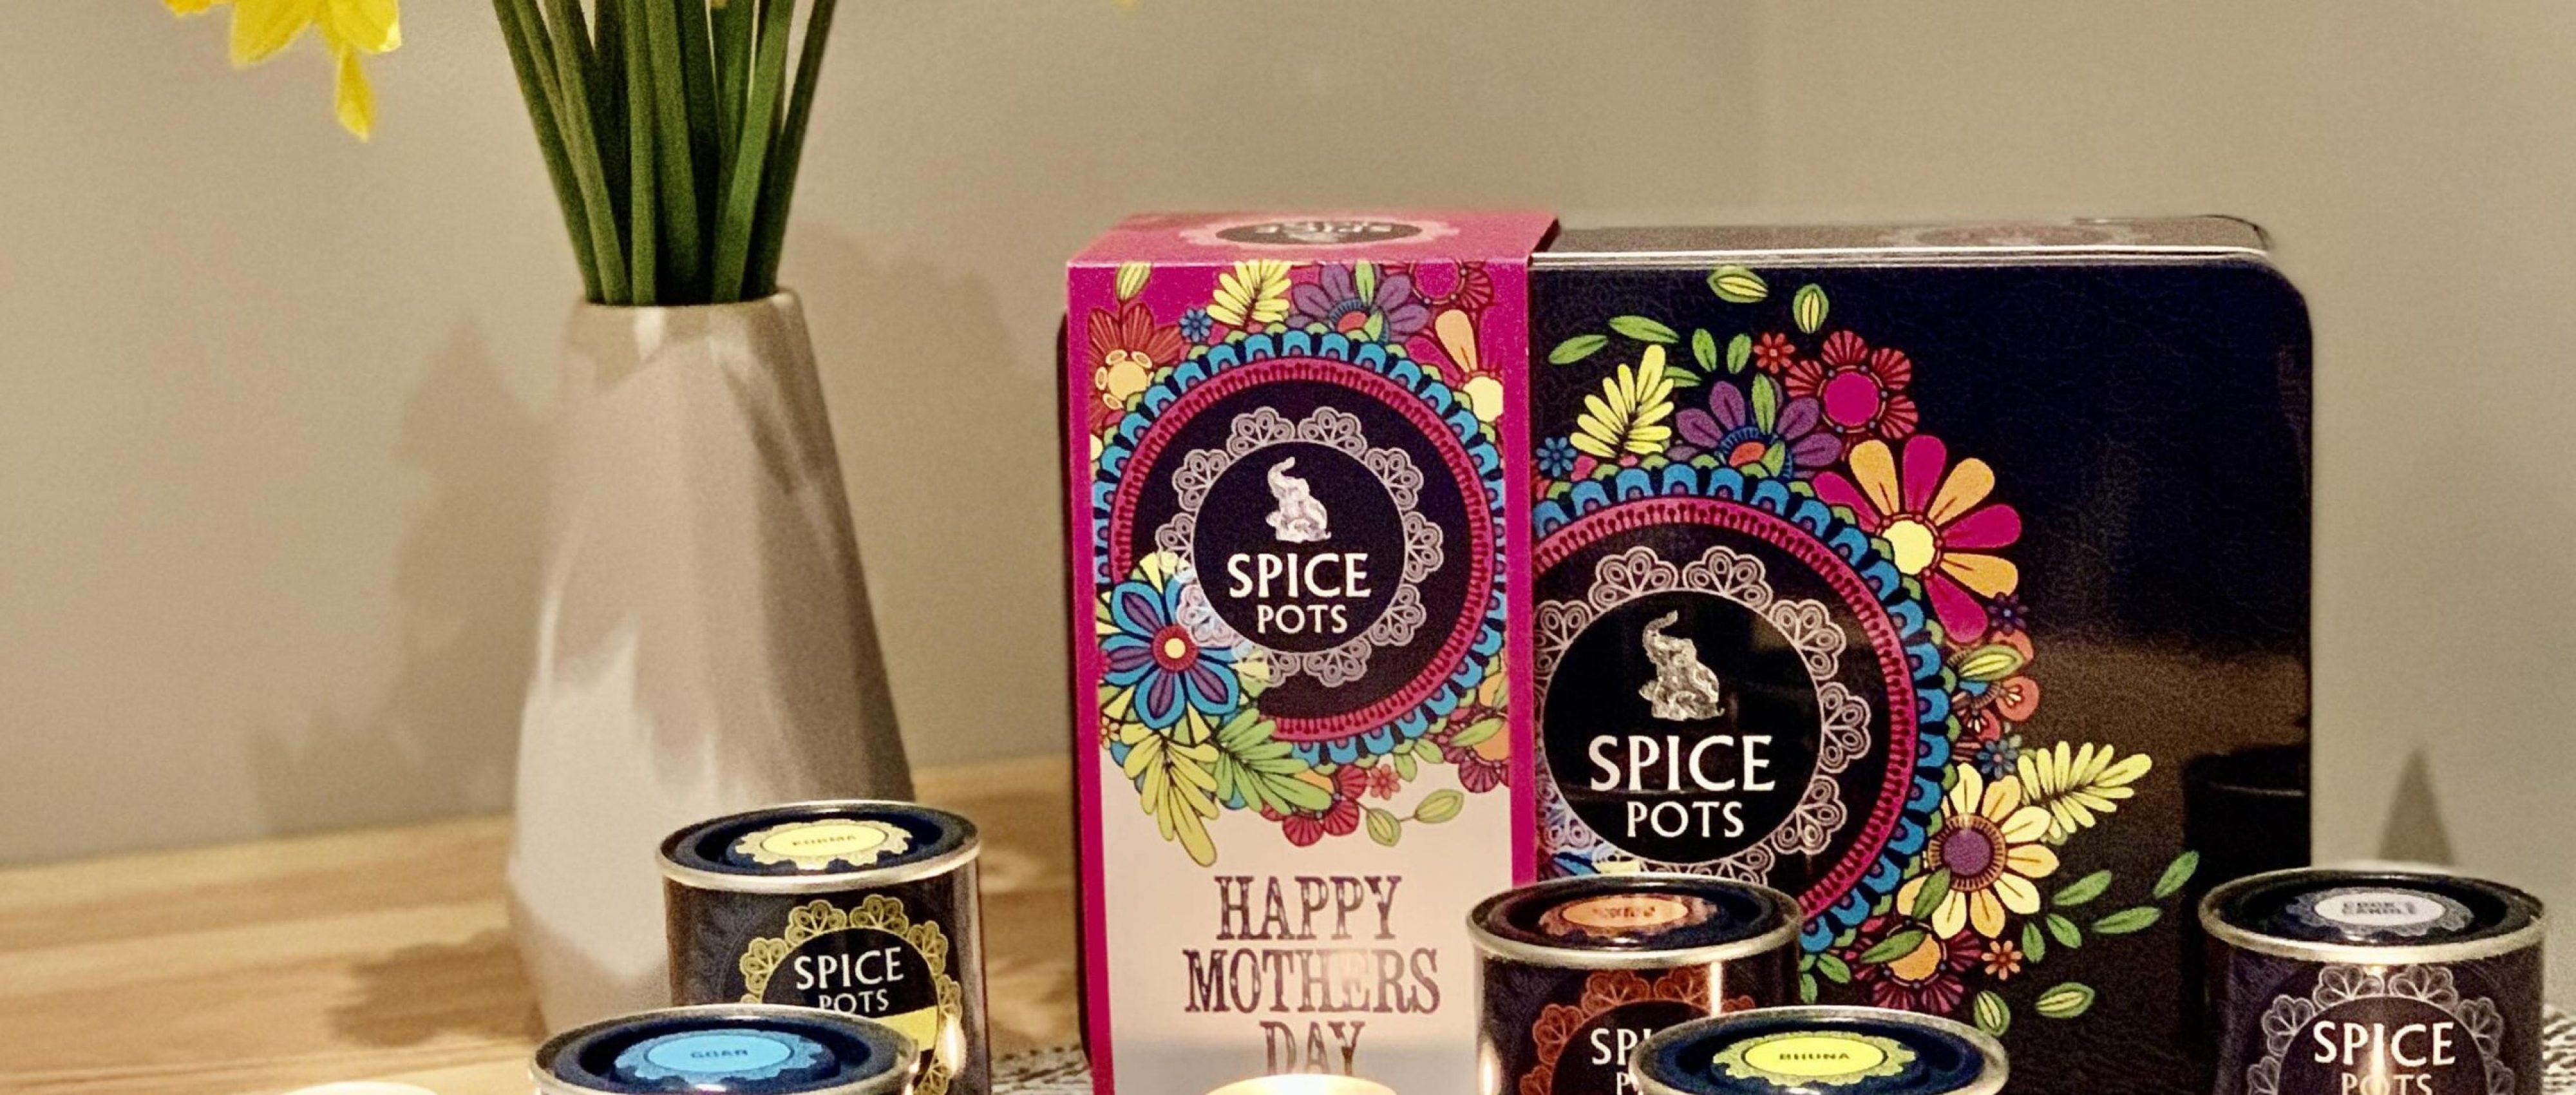 Spice pots - Mothers day